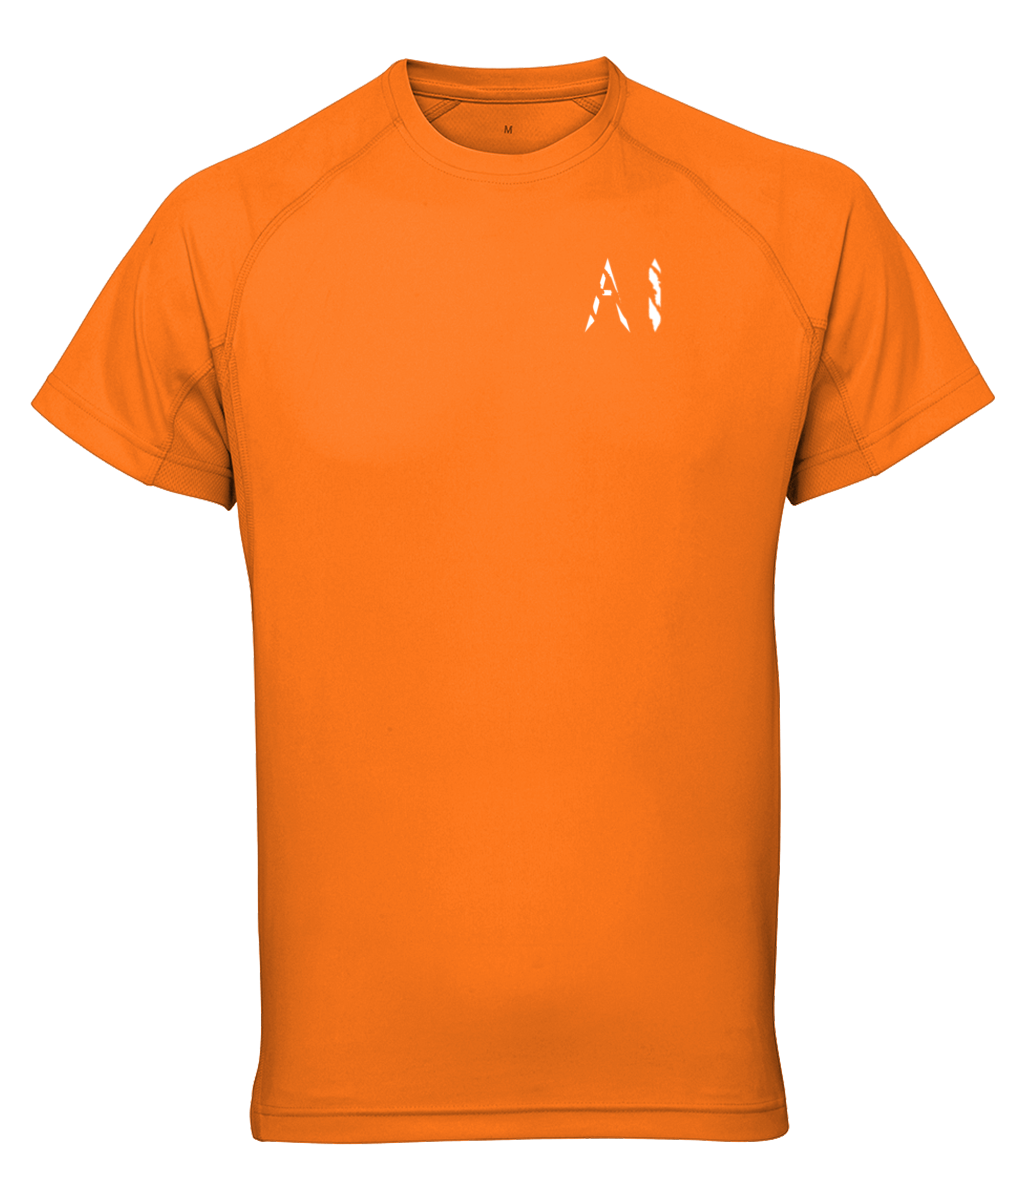 Womens orange Athletic Performance Top with White AI logo on left breast